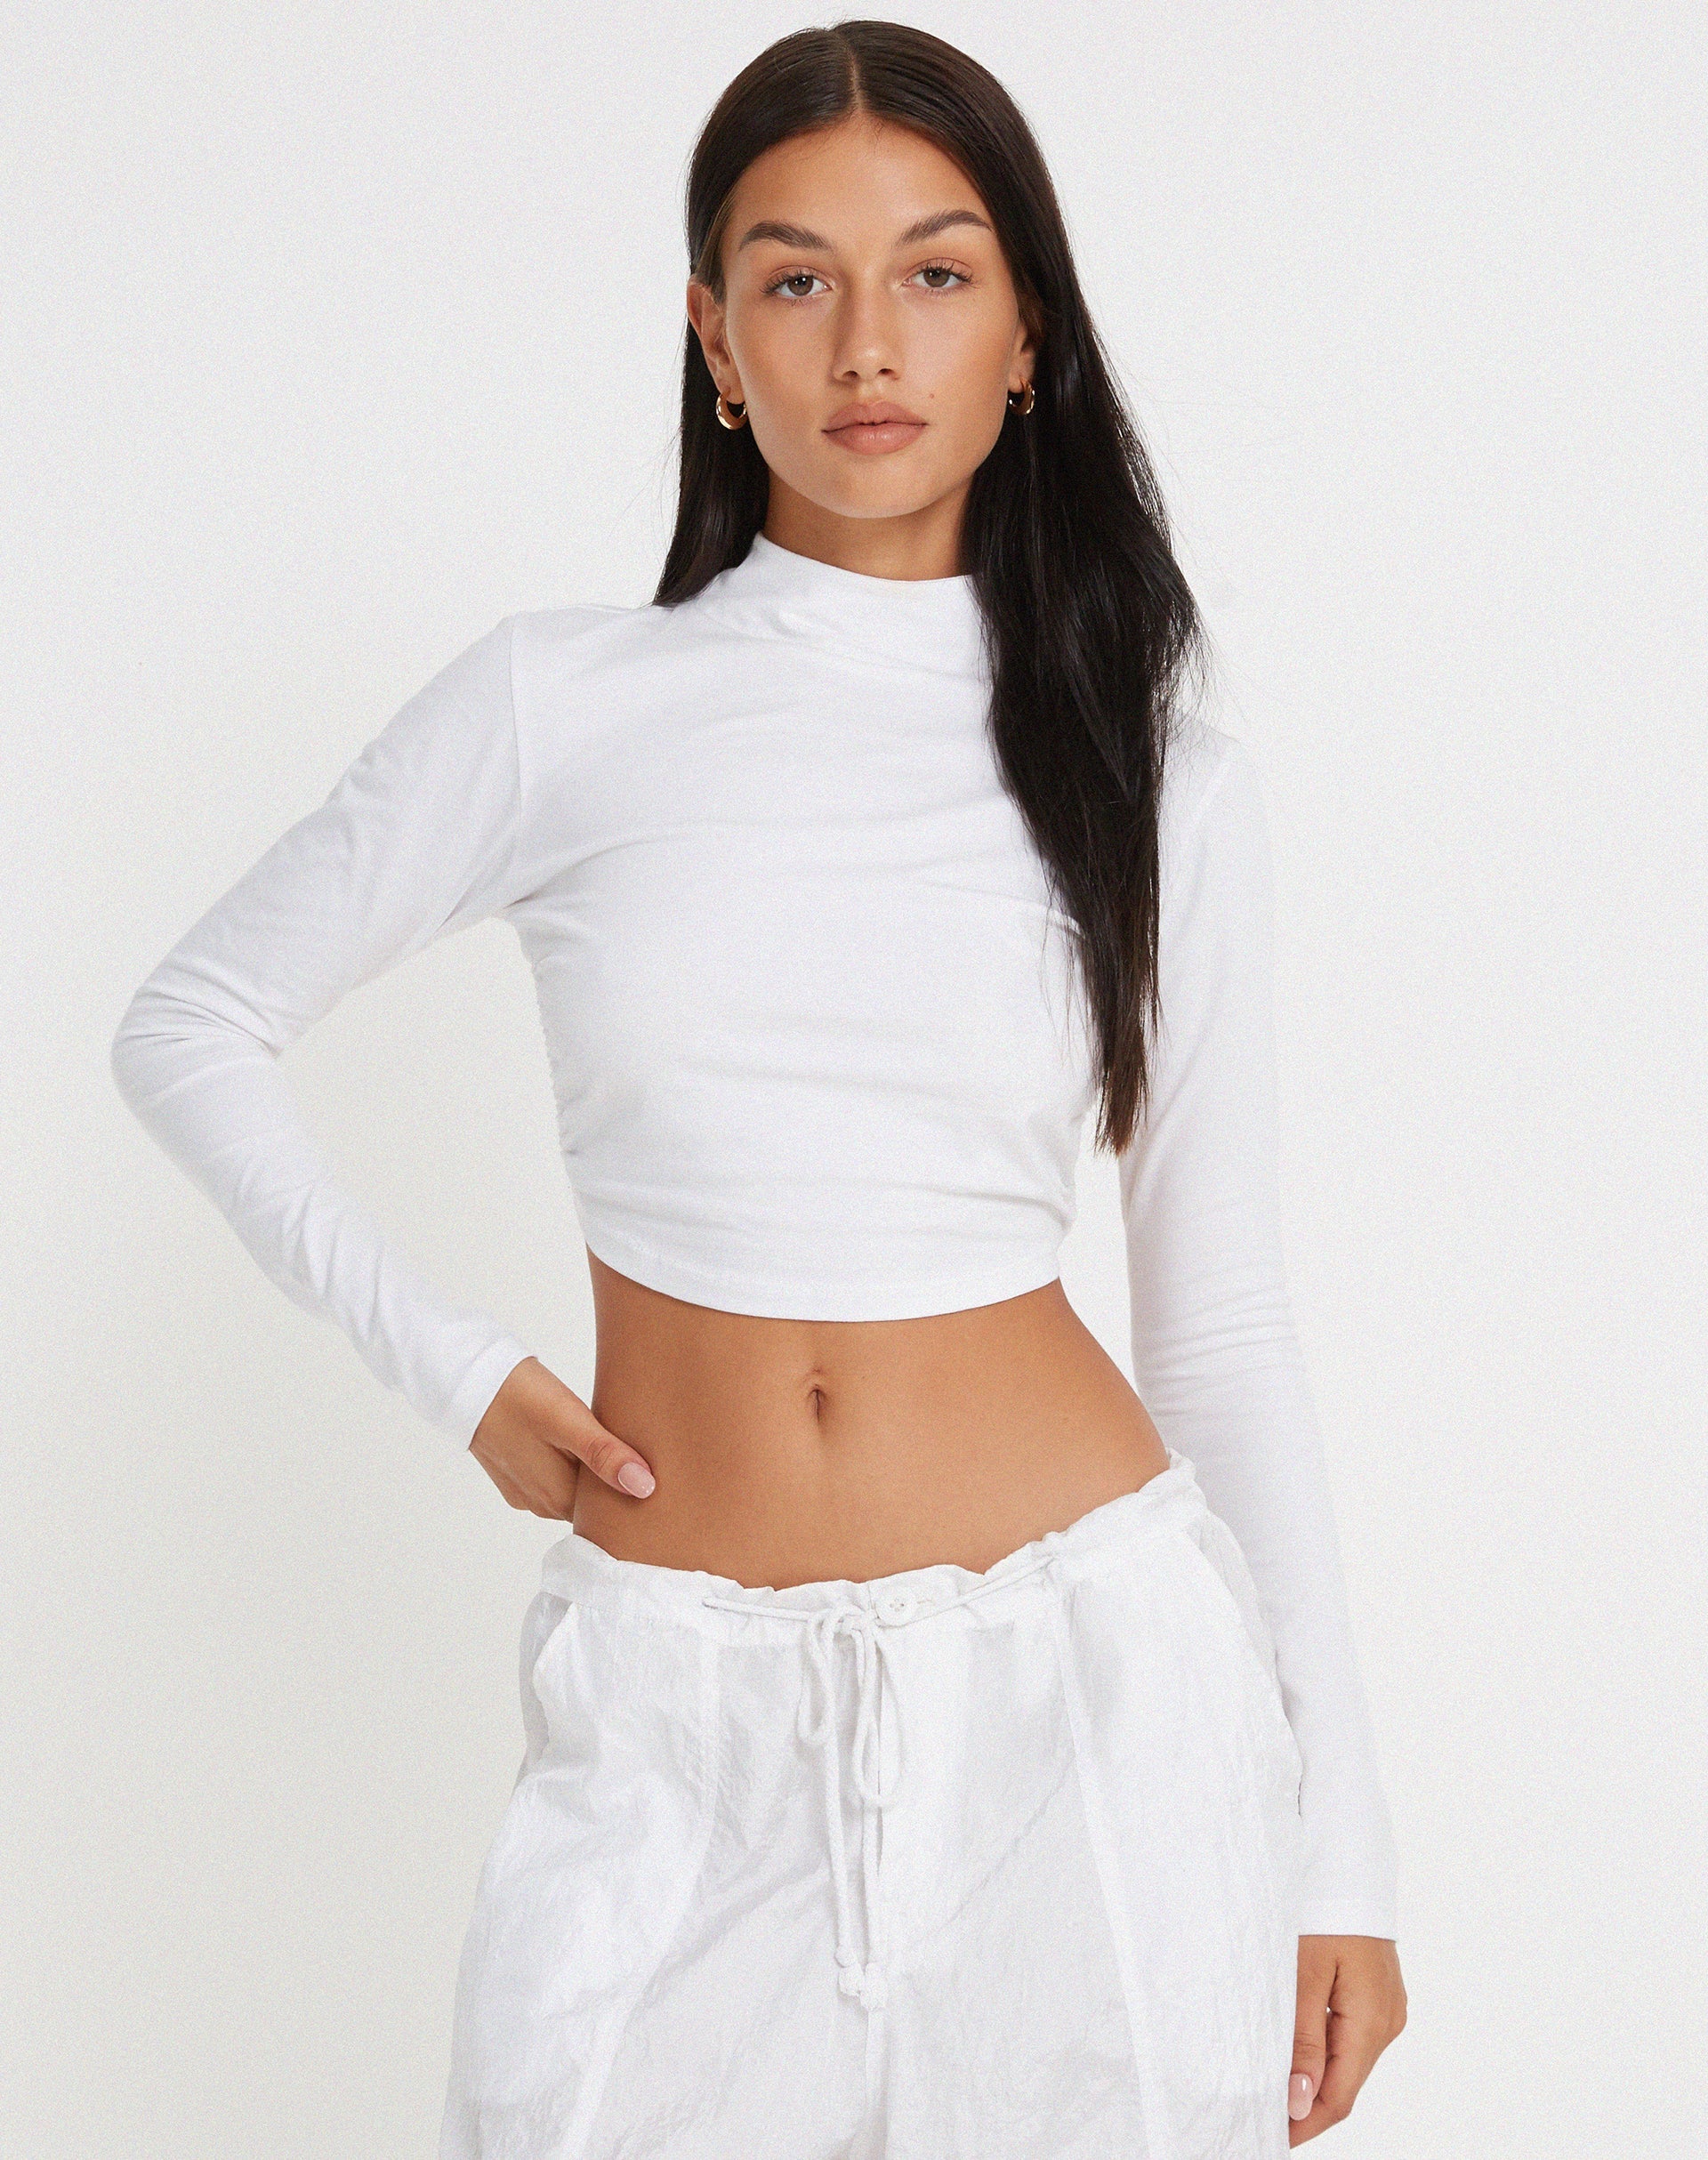 image of Quelia Crop Top in White